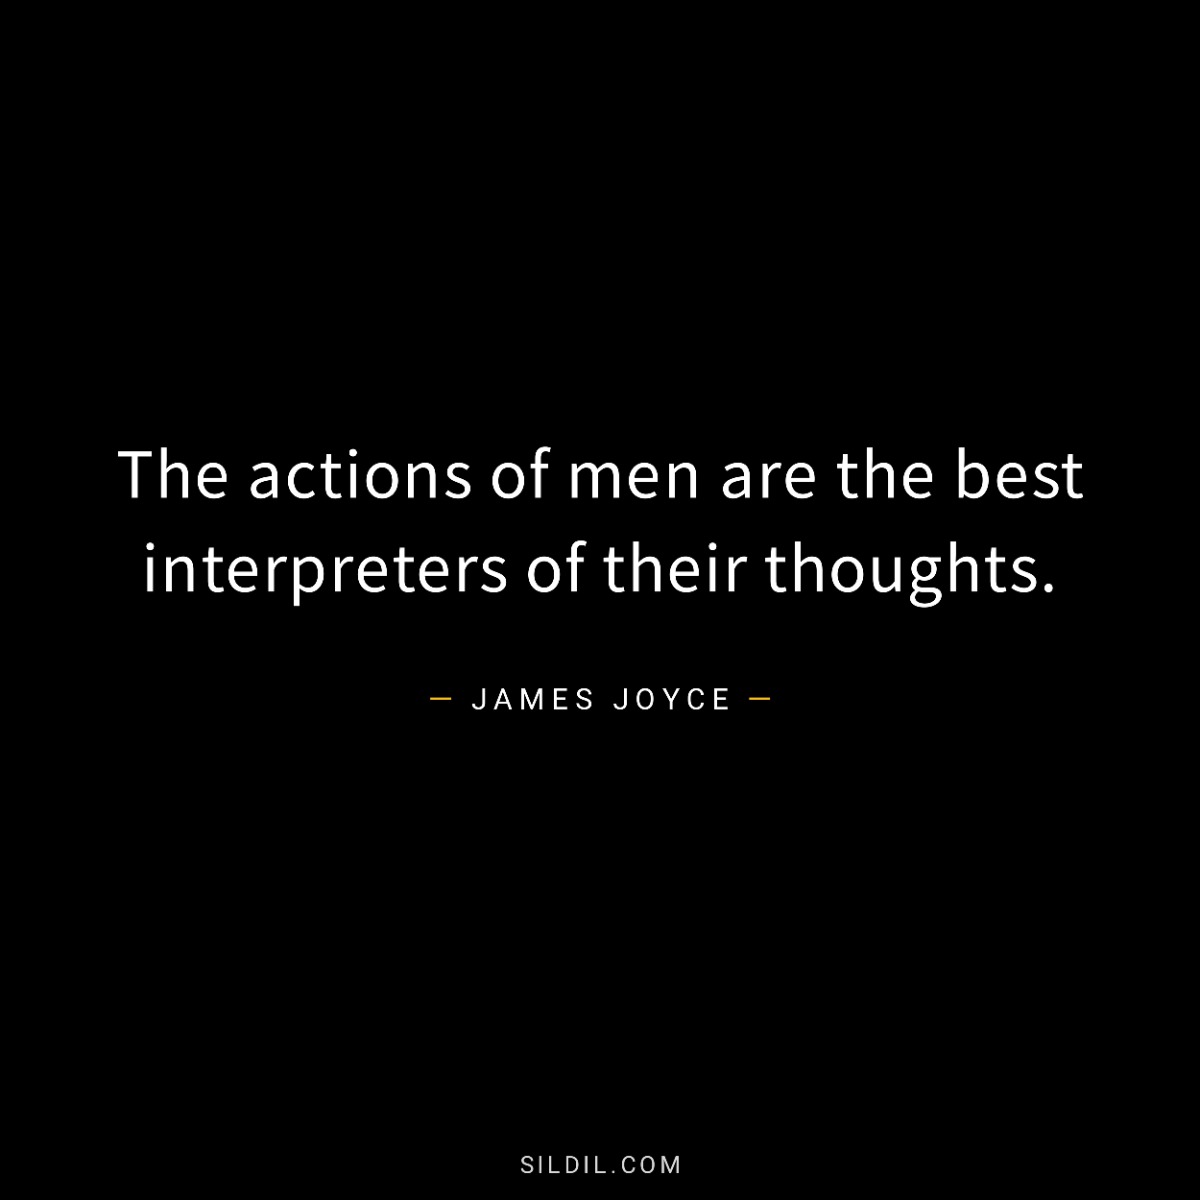 The actions of men are the best interpreters of their thoughts.